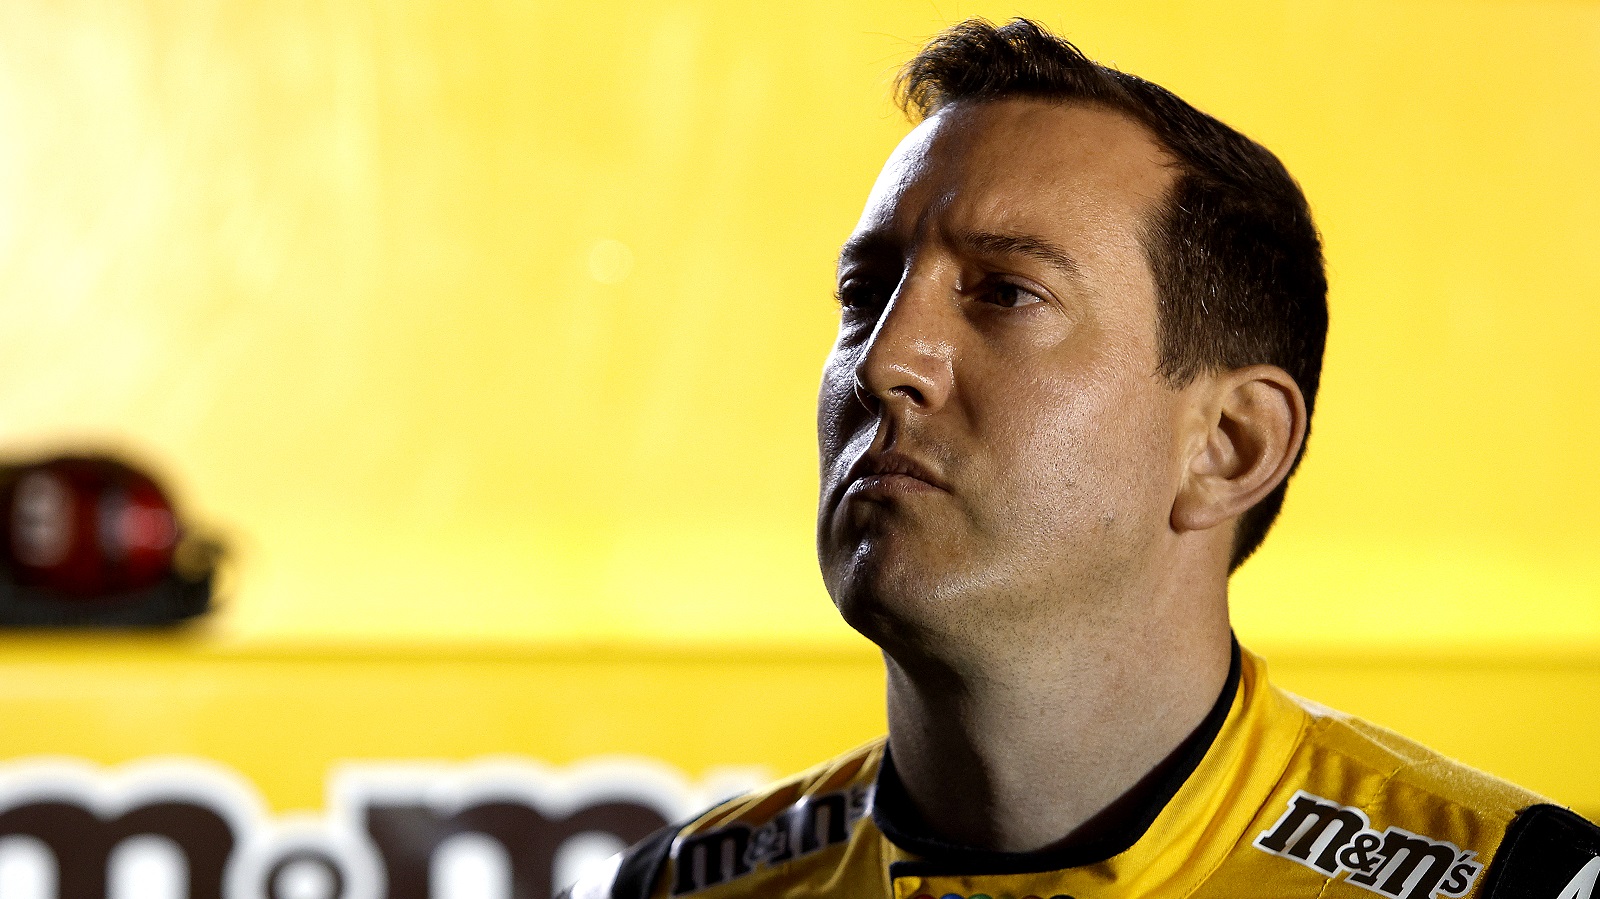 Kyle Busch, driver of the No. 18 Toyota, looks on during qualifying for the NASCAR Cup Series Daytona 500 on Feb. 16, 2022. | Sean Gardner/Getty Images